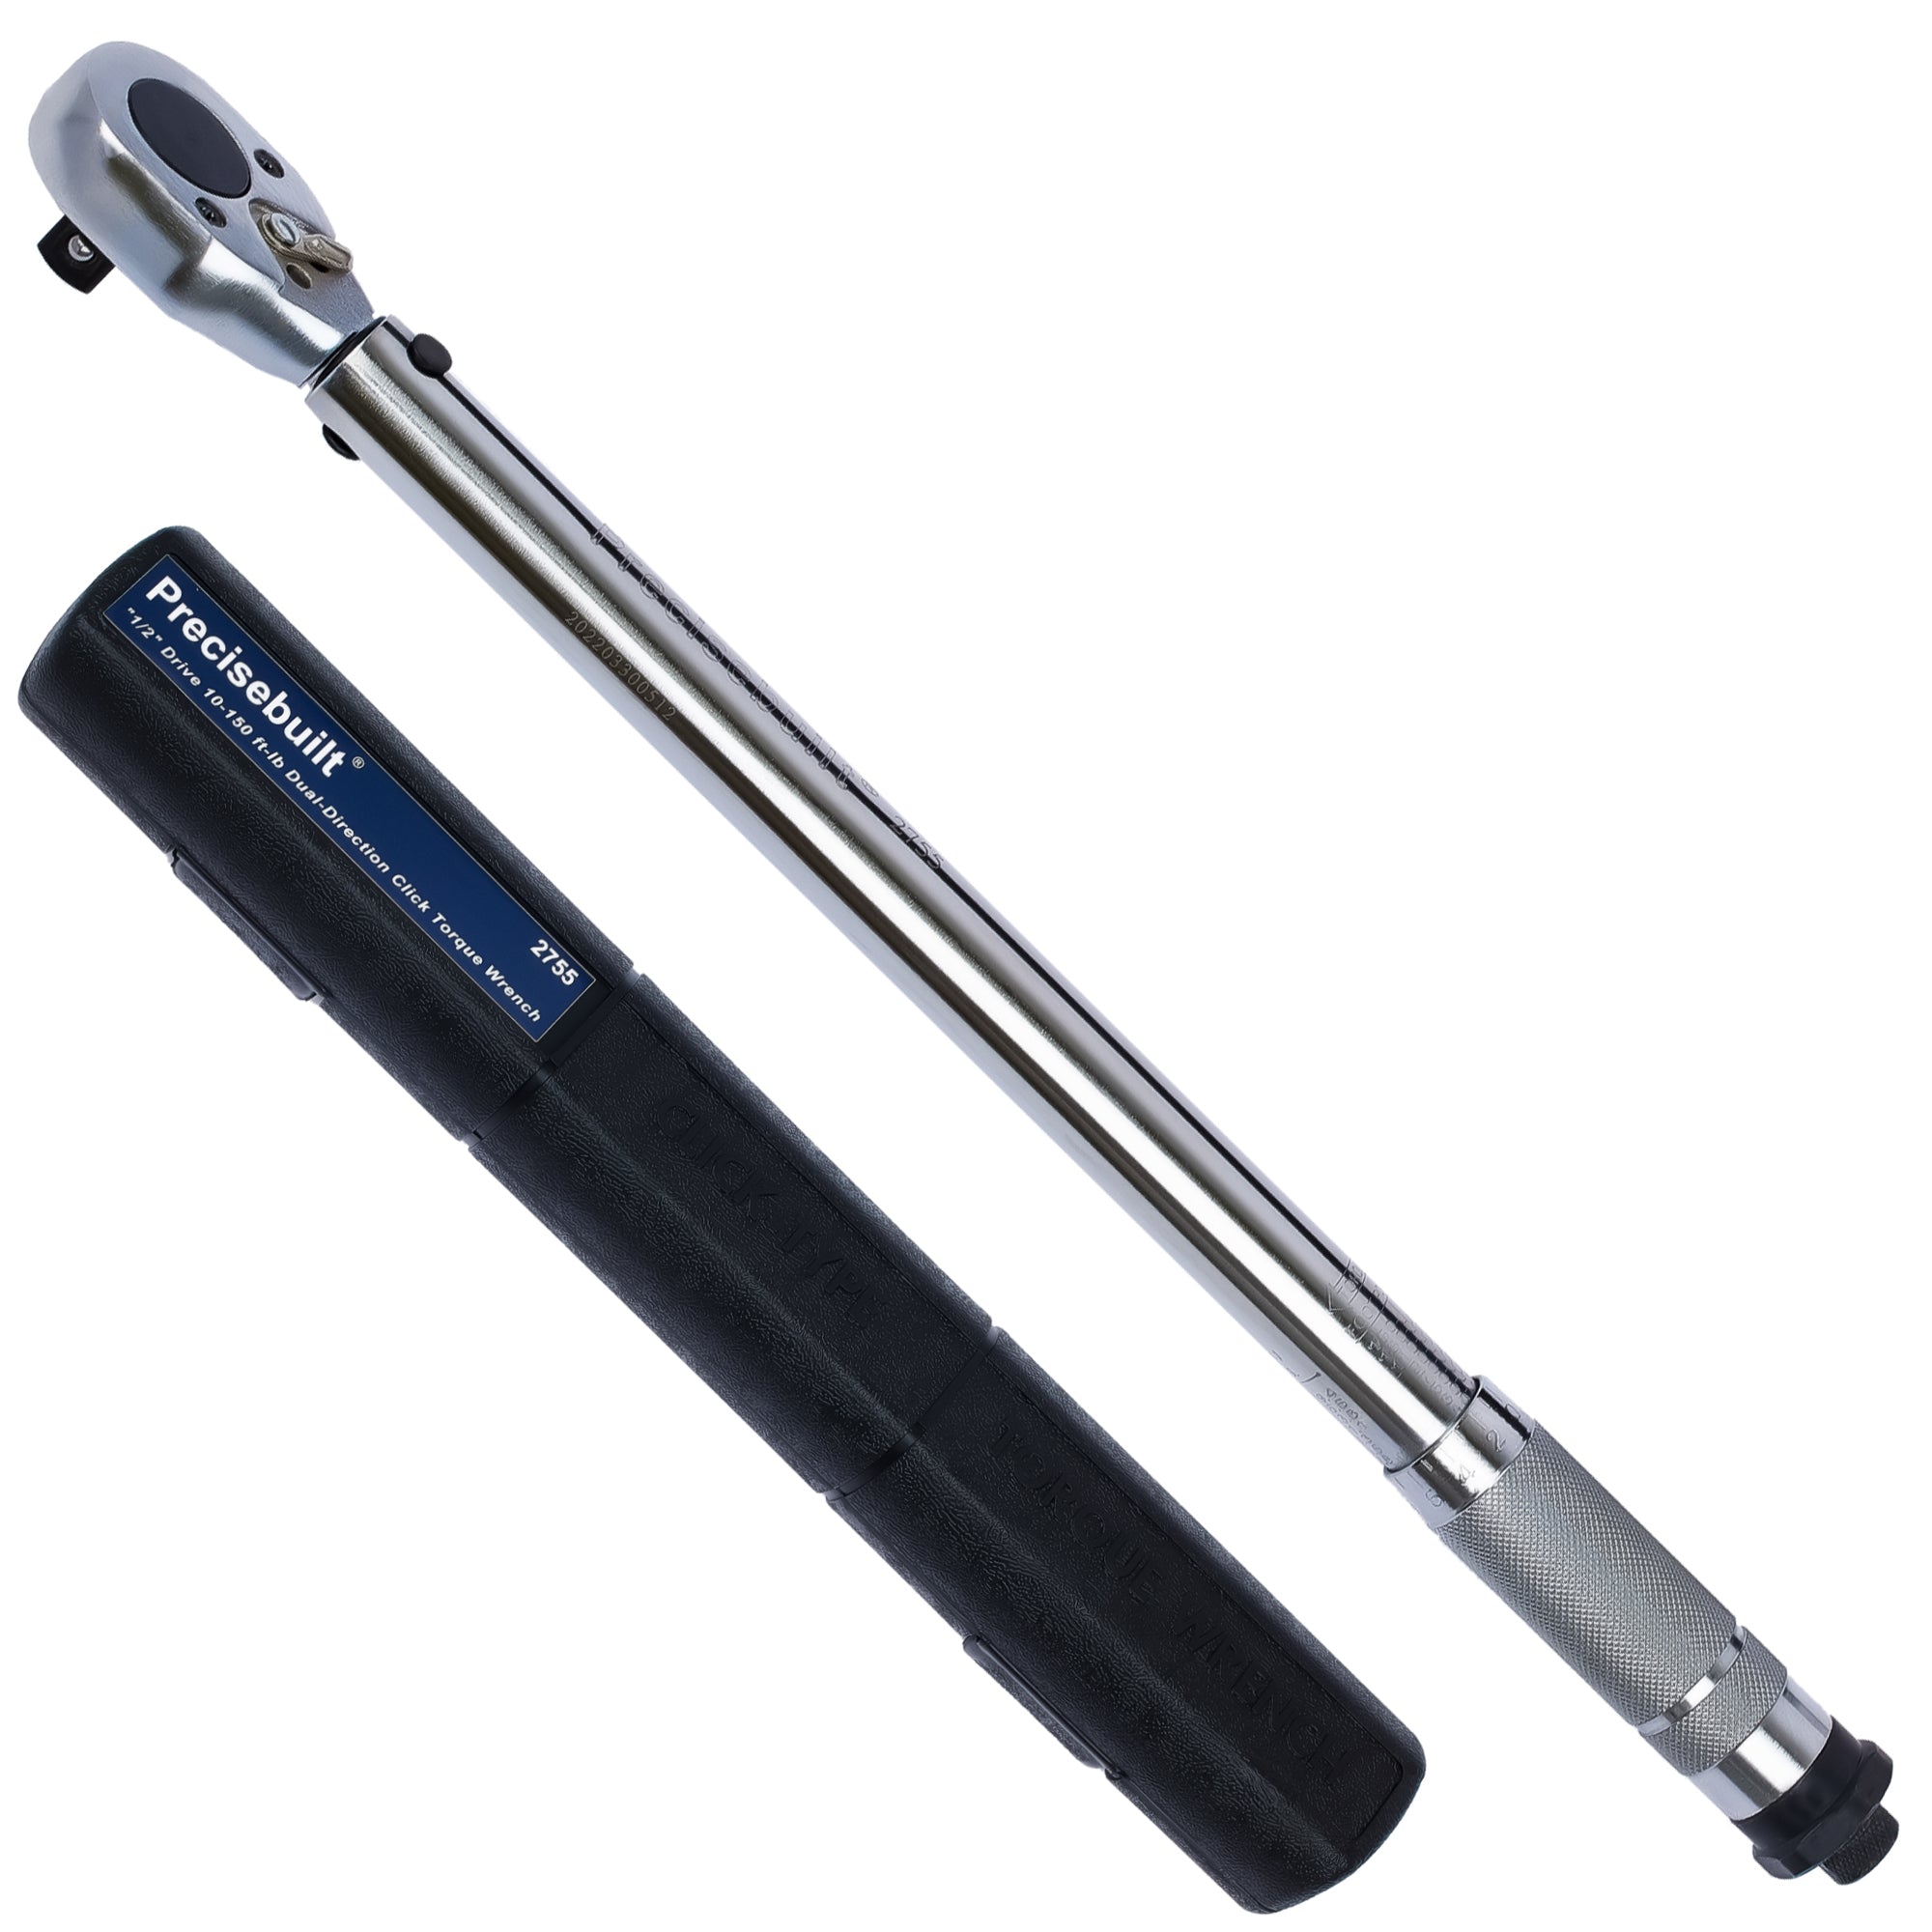 BENTISM Torque Wrench, 1/2 Drive Click Torque Wrench  10-150ft.lb/14-204n.m, Dual-Direction Adjustable Torque Wrench Set,  Mechanical Dual Range Scales